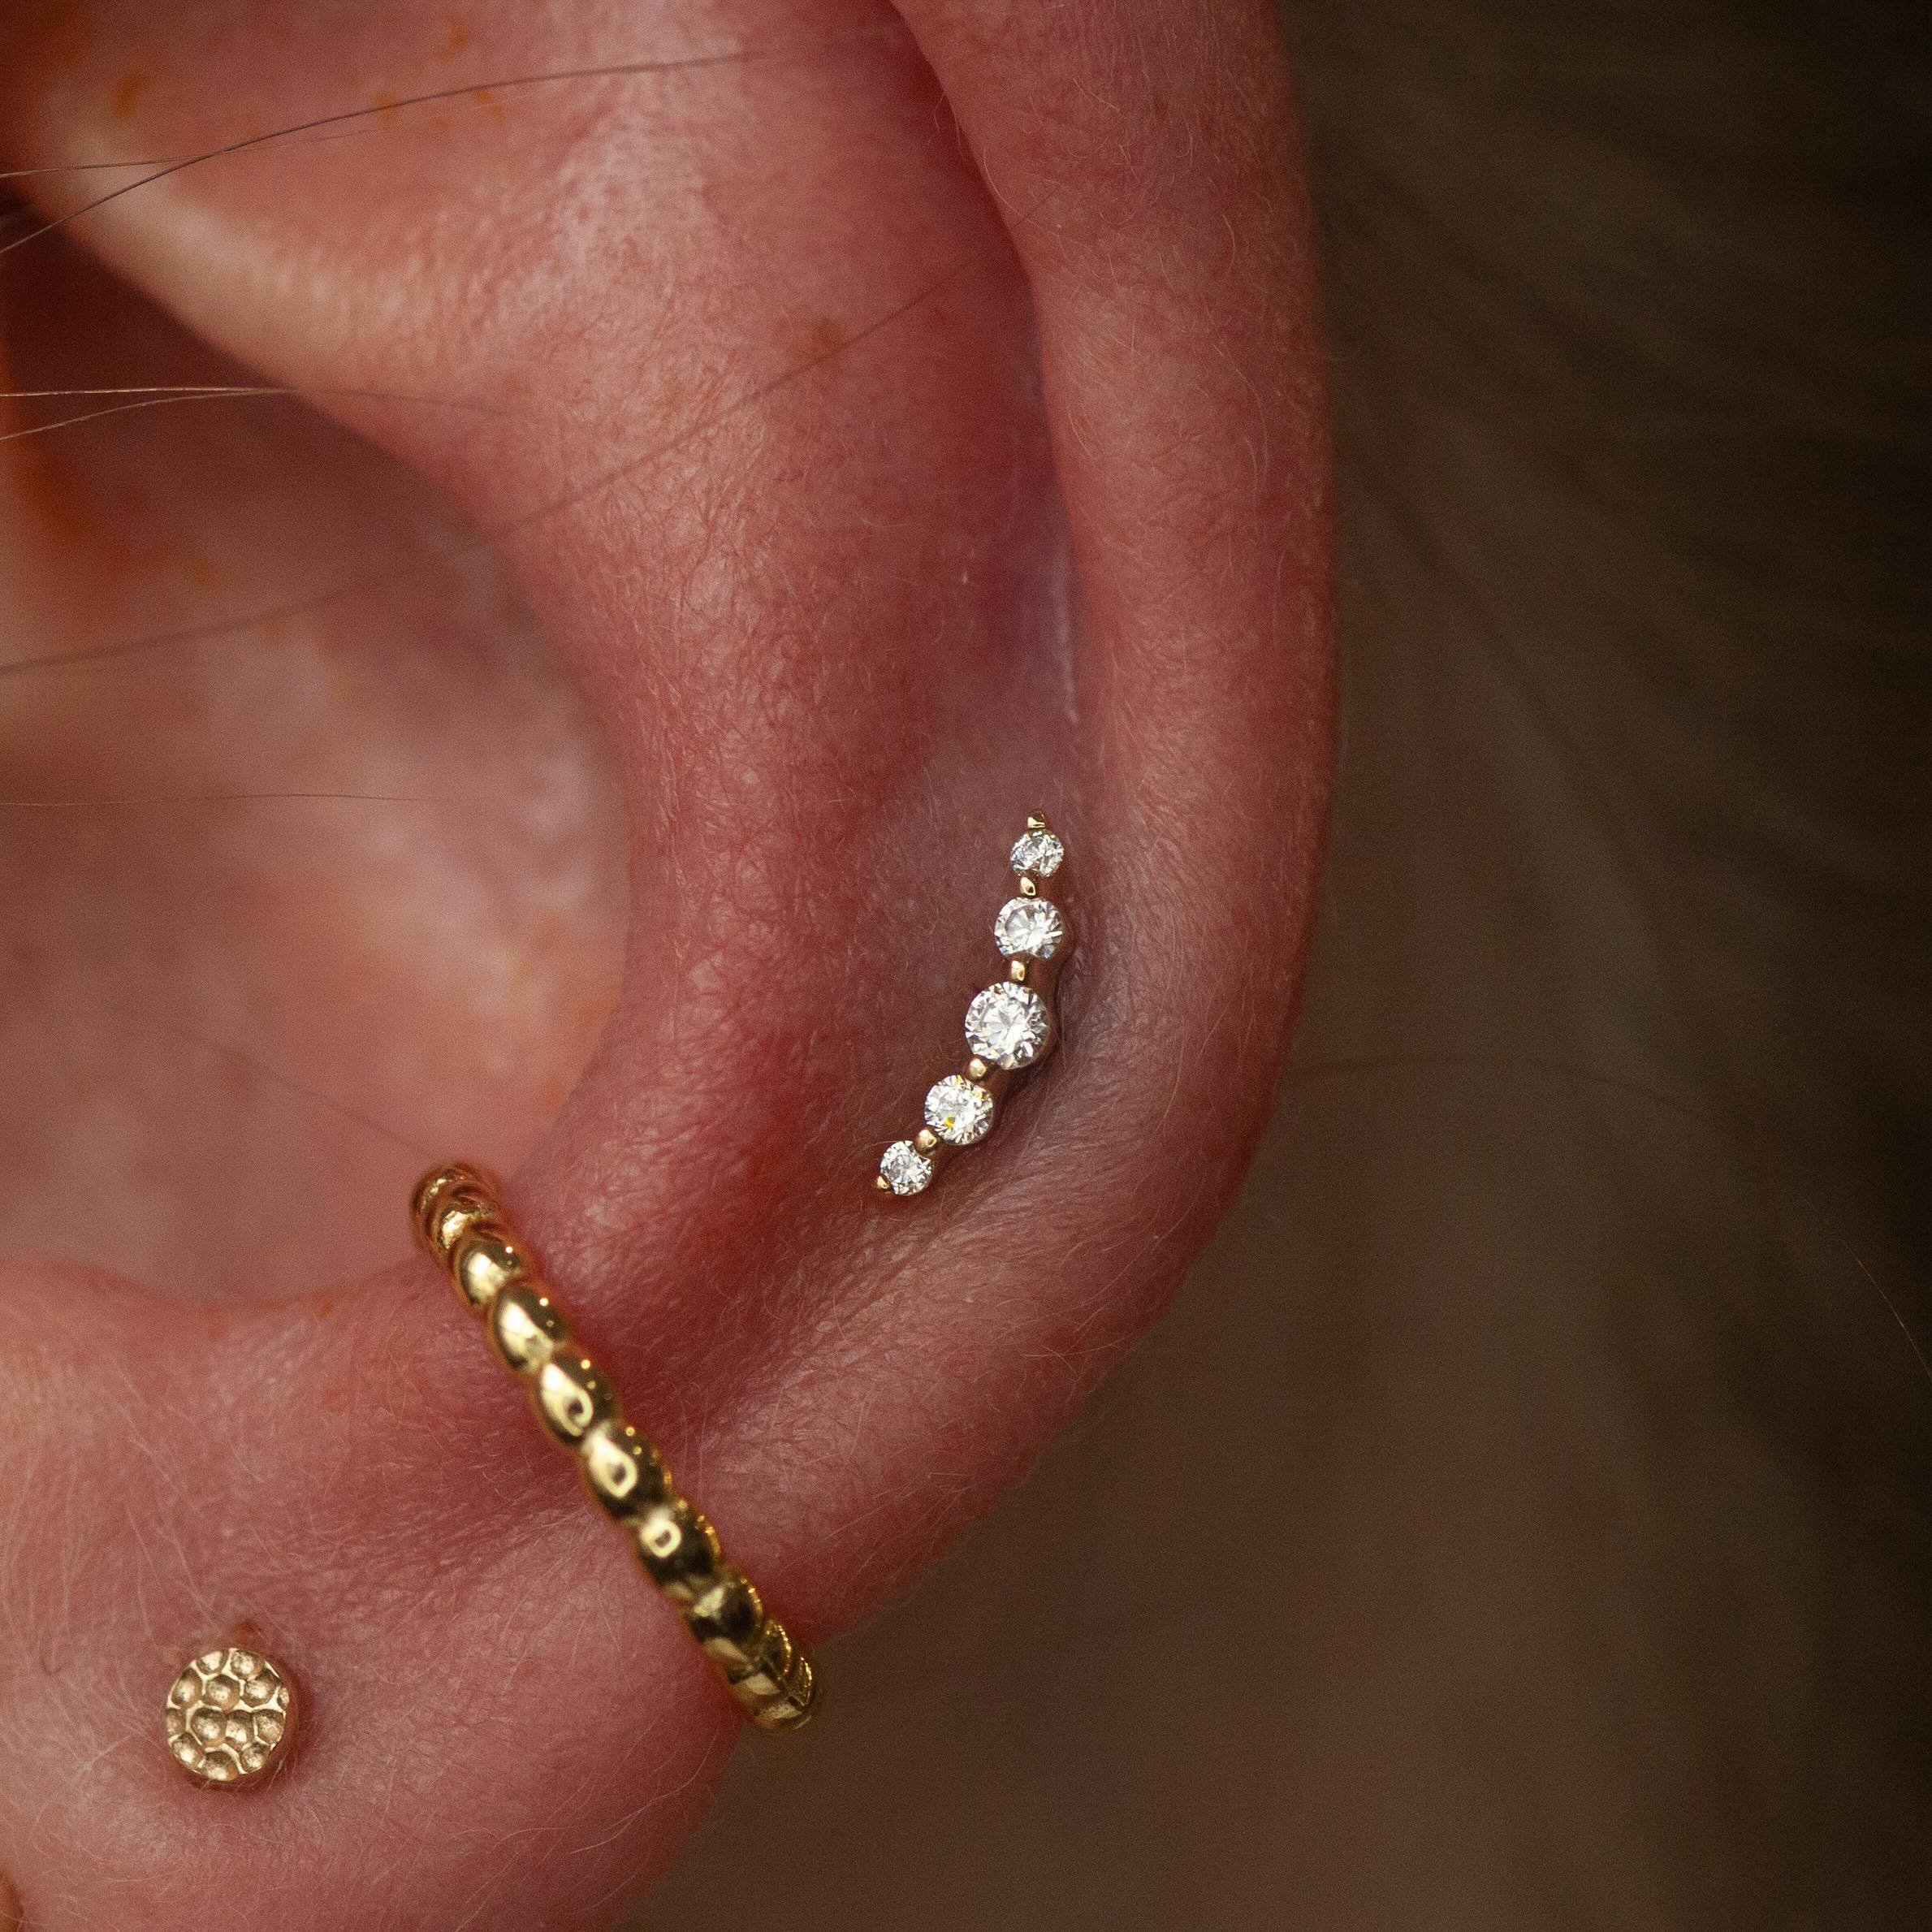 A cute mid helix 🩷 I&rsquo;ve got some time this upcoming week if you want to schedule an appointment on the website 🥰 I&rsquo;ll see you soon! Photo by @countergoblin 💯 Done at @arcadiabodypiercing 😌